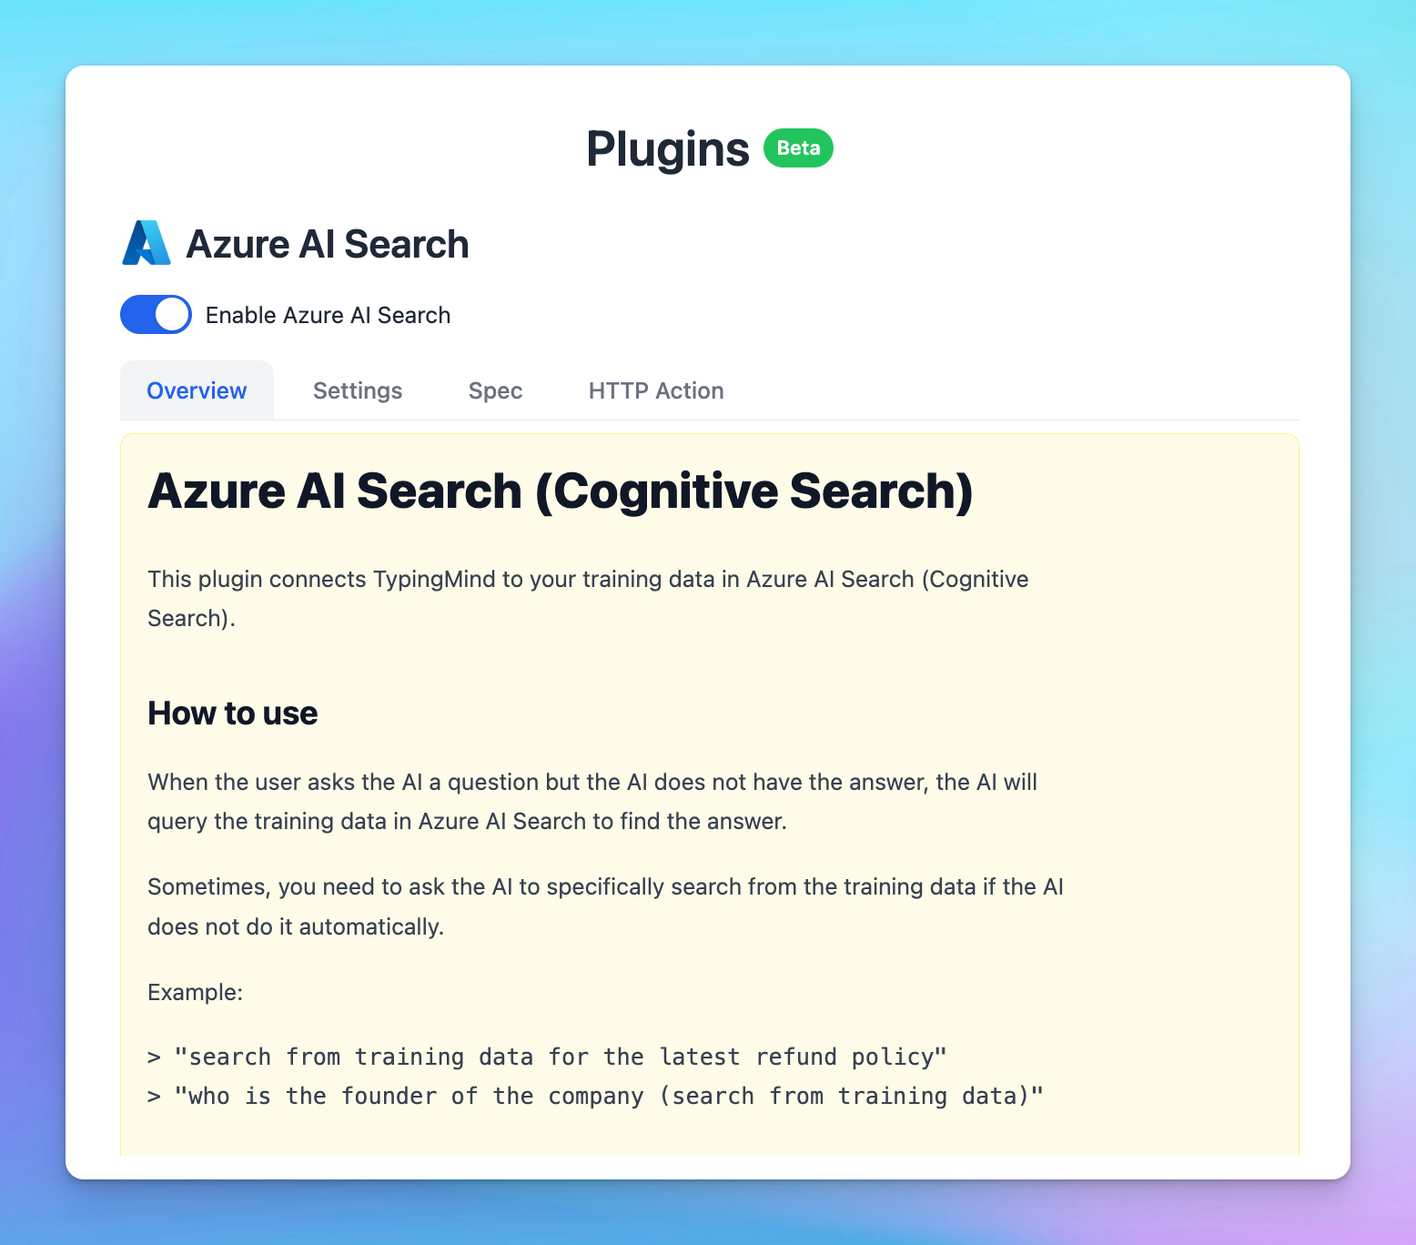 Azure AI Search plugin allows you connect your vector database in Azure AI Search